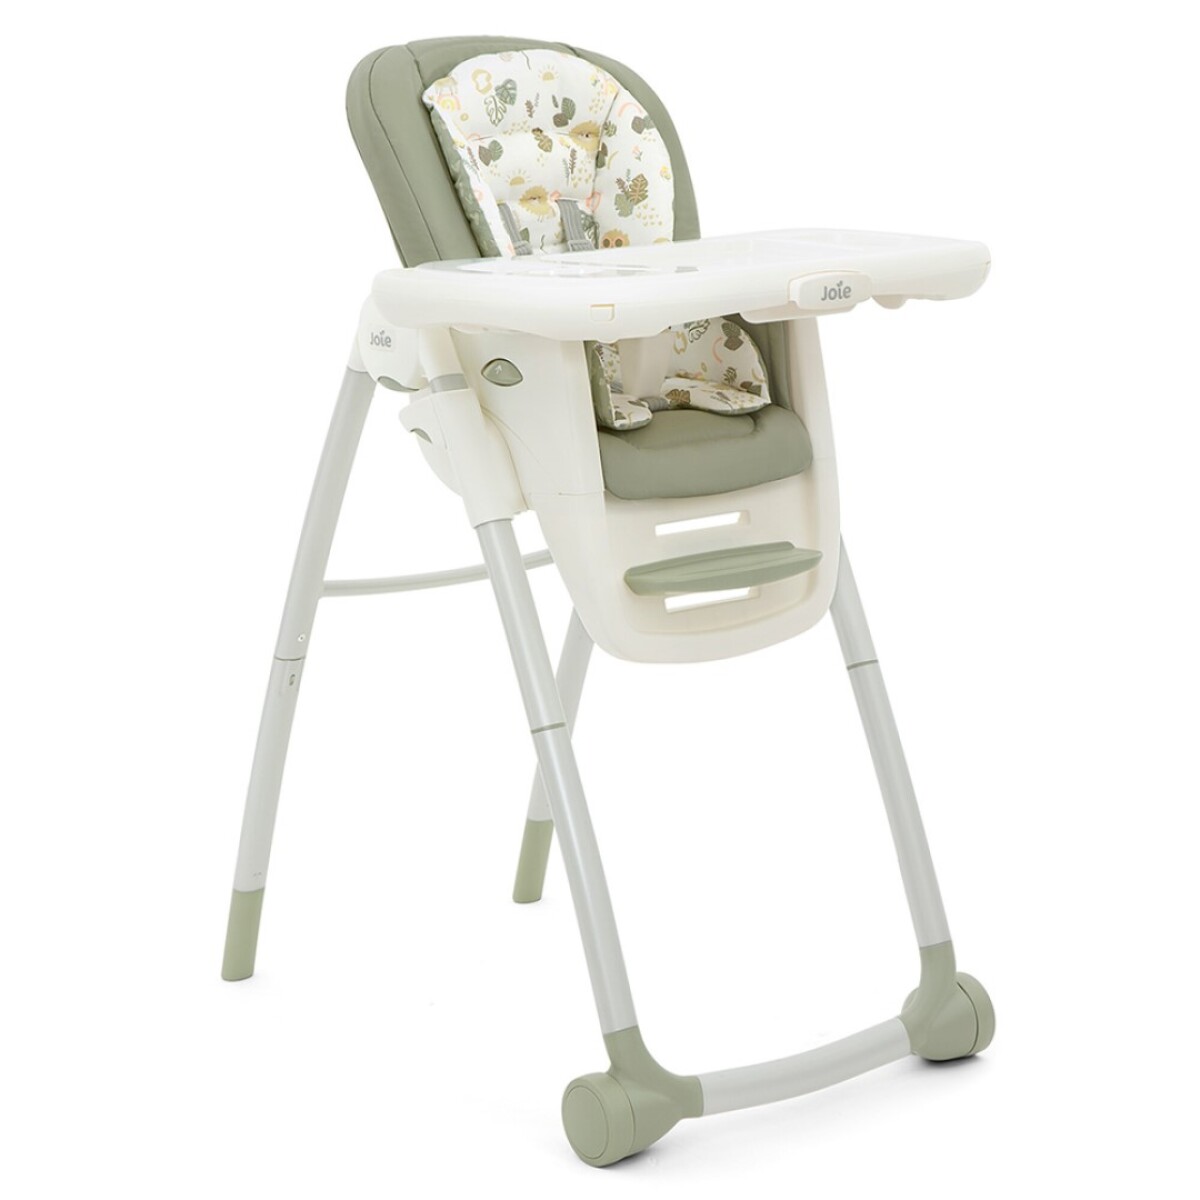 MULTIPLY 6IN1 LEO - JOIE 6 a 72 meses - BLANCO 